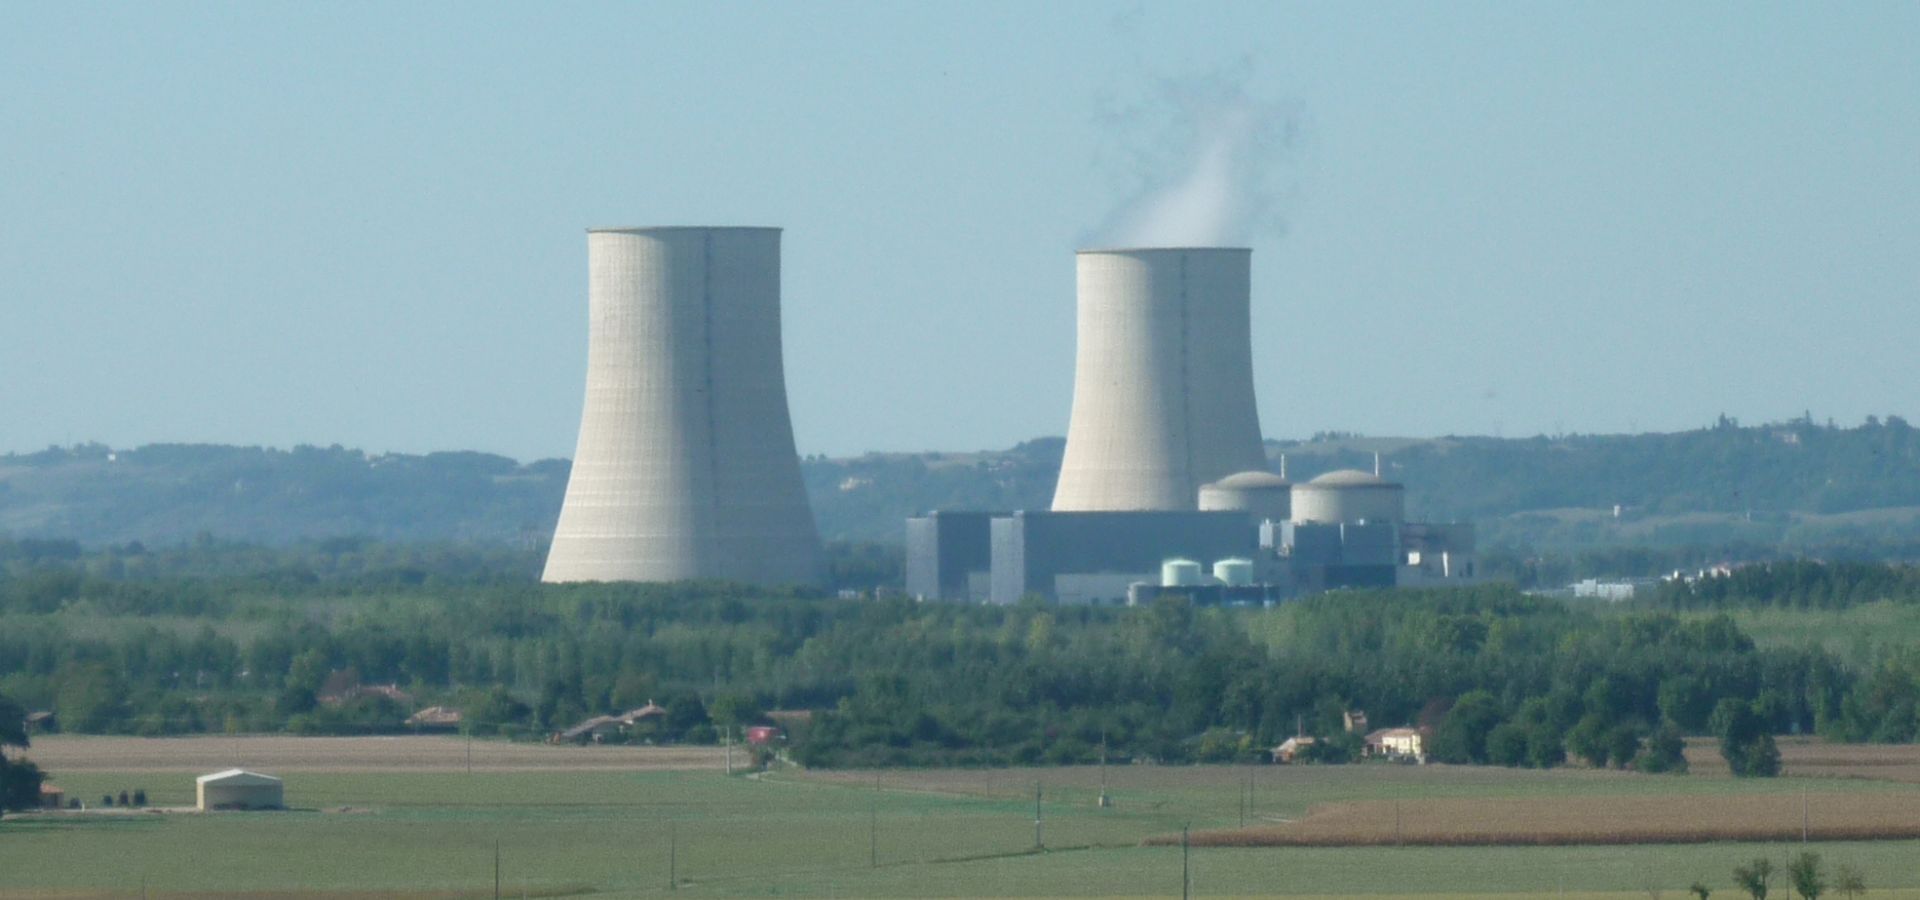 nuclear plant Golfrech shown from a field, steam coming from one tower